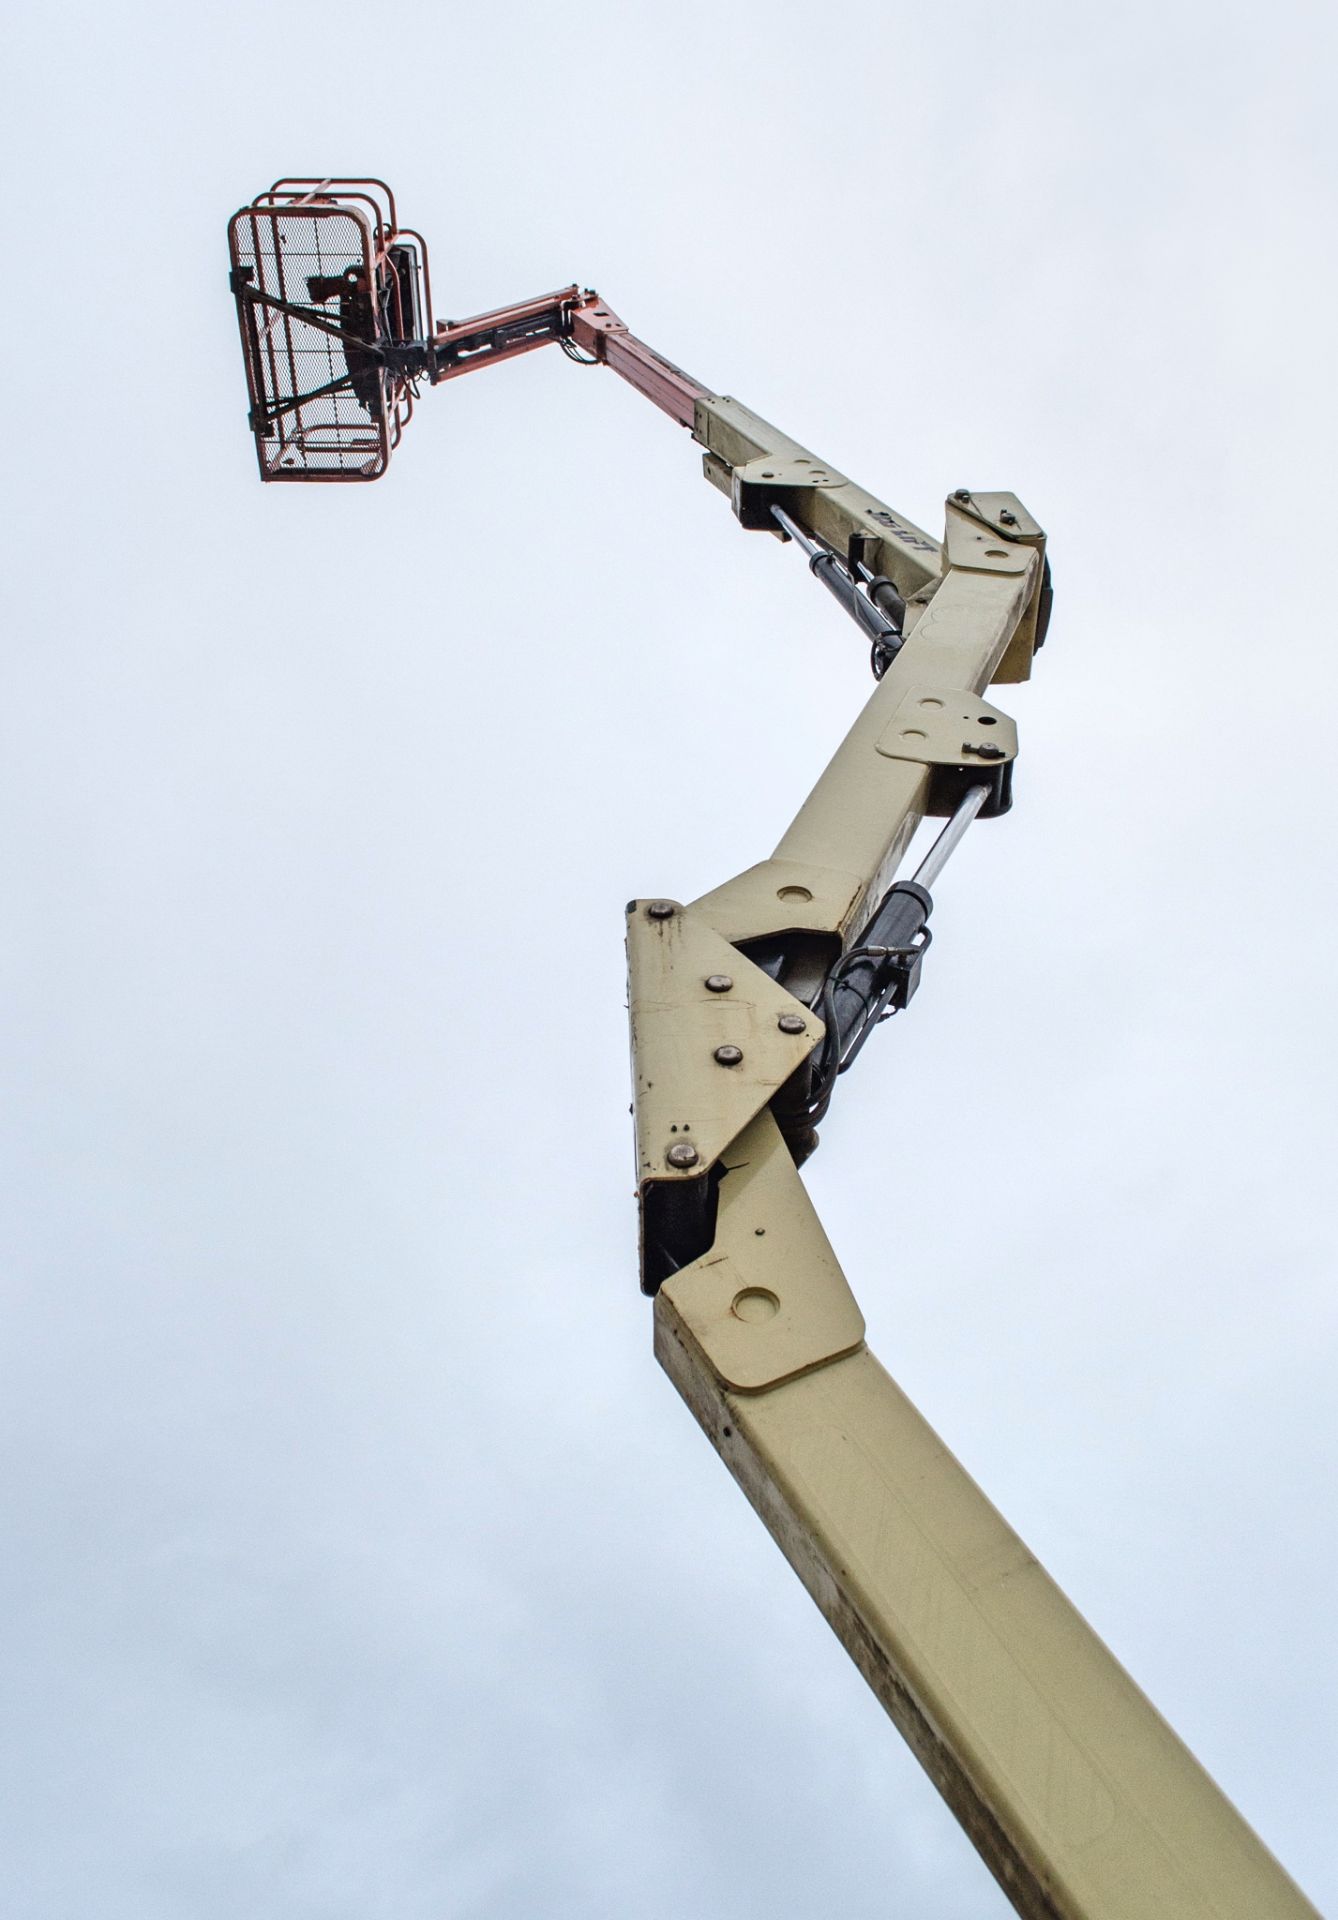 JLG M450AJ hybrid articulated boom lift Year: 2012 S/N: 156095 Recorded hours: 8 (Suspect clock - Image 10 of 17